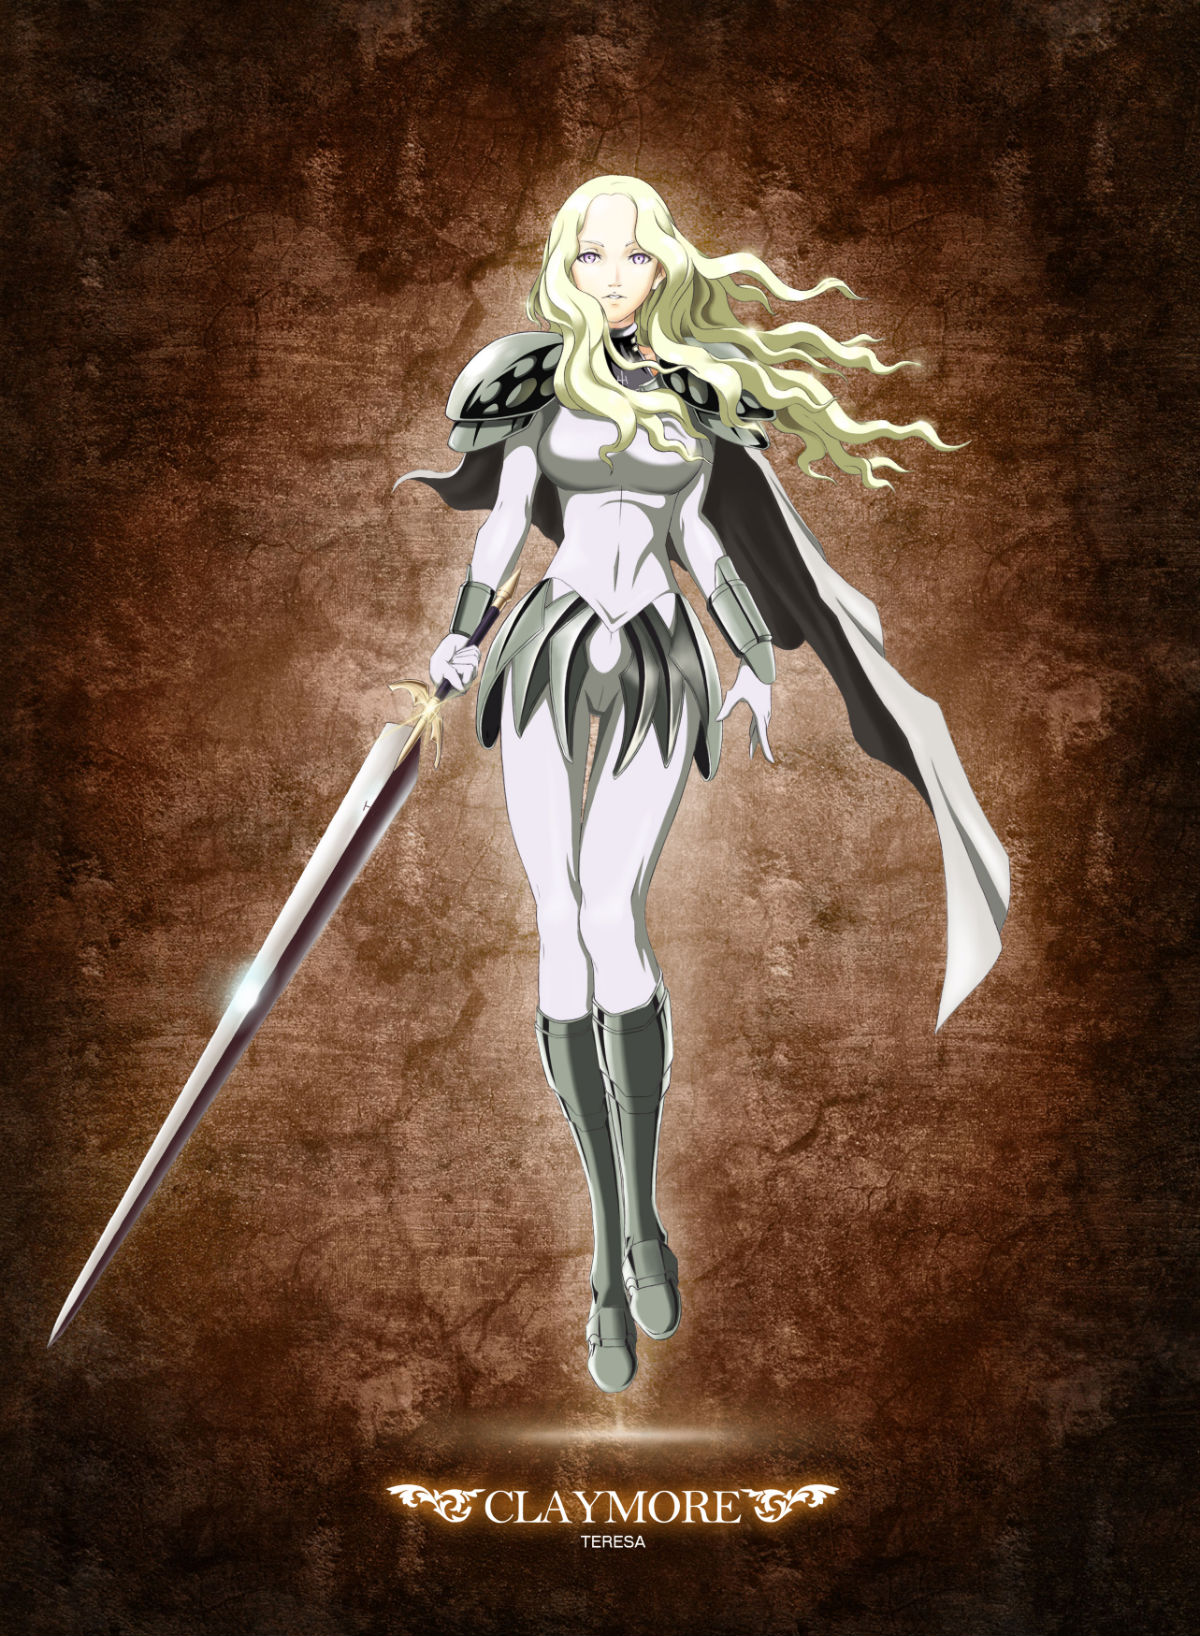 Teresa Of The Faint Smile From Claymore